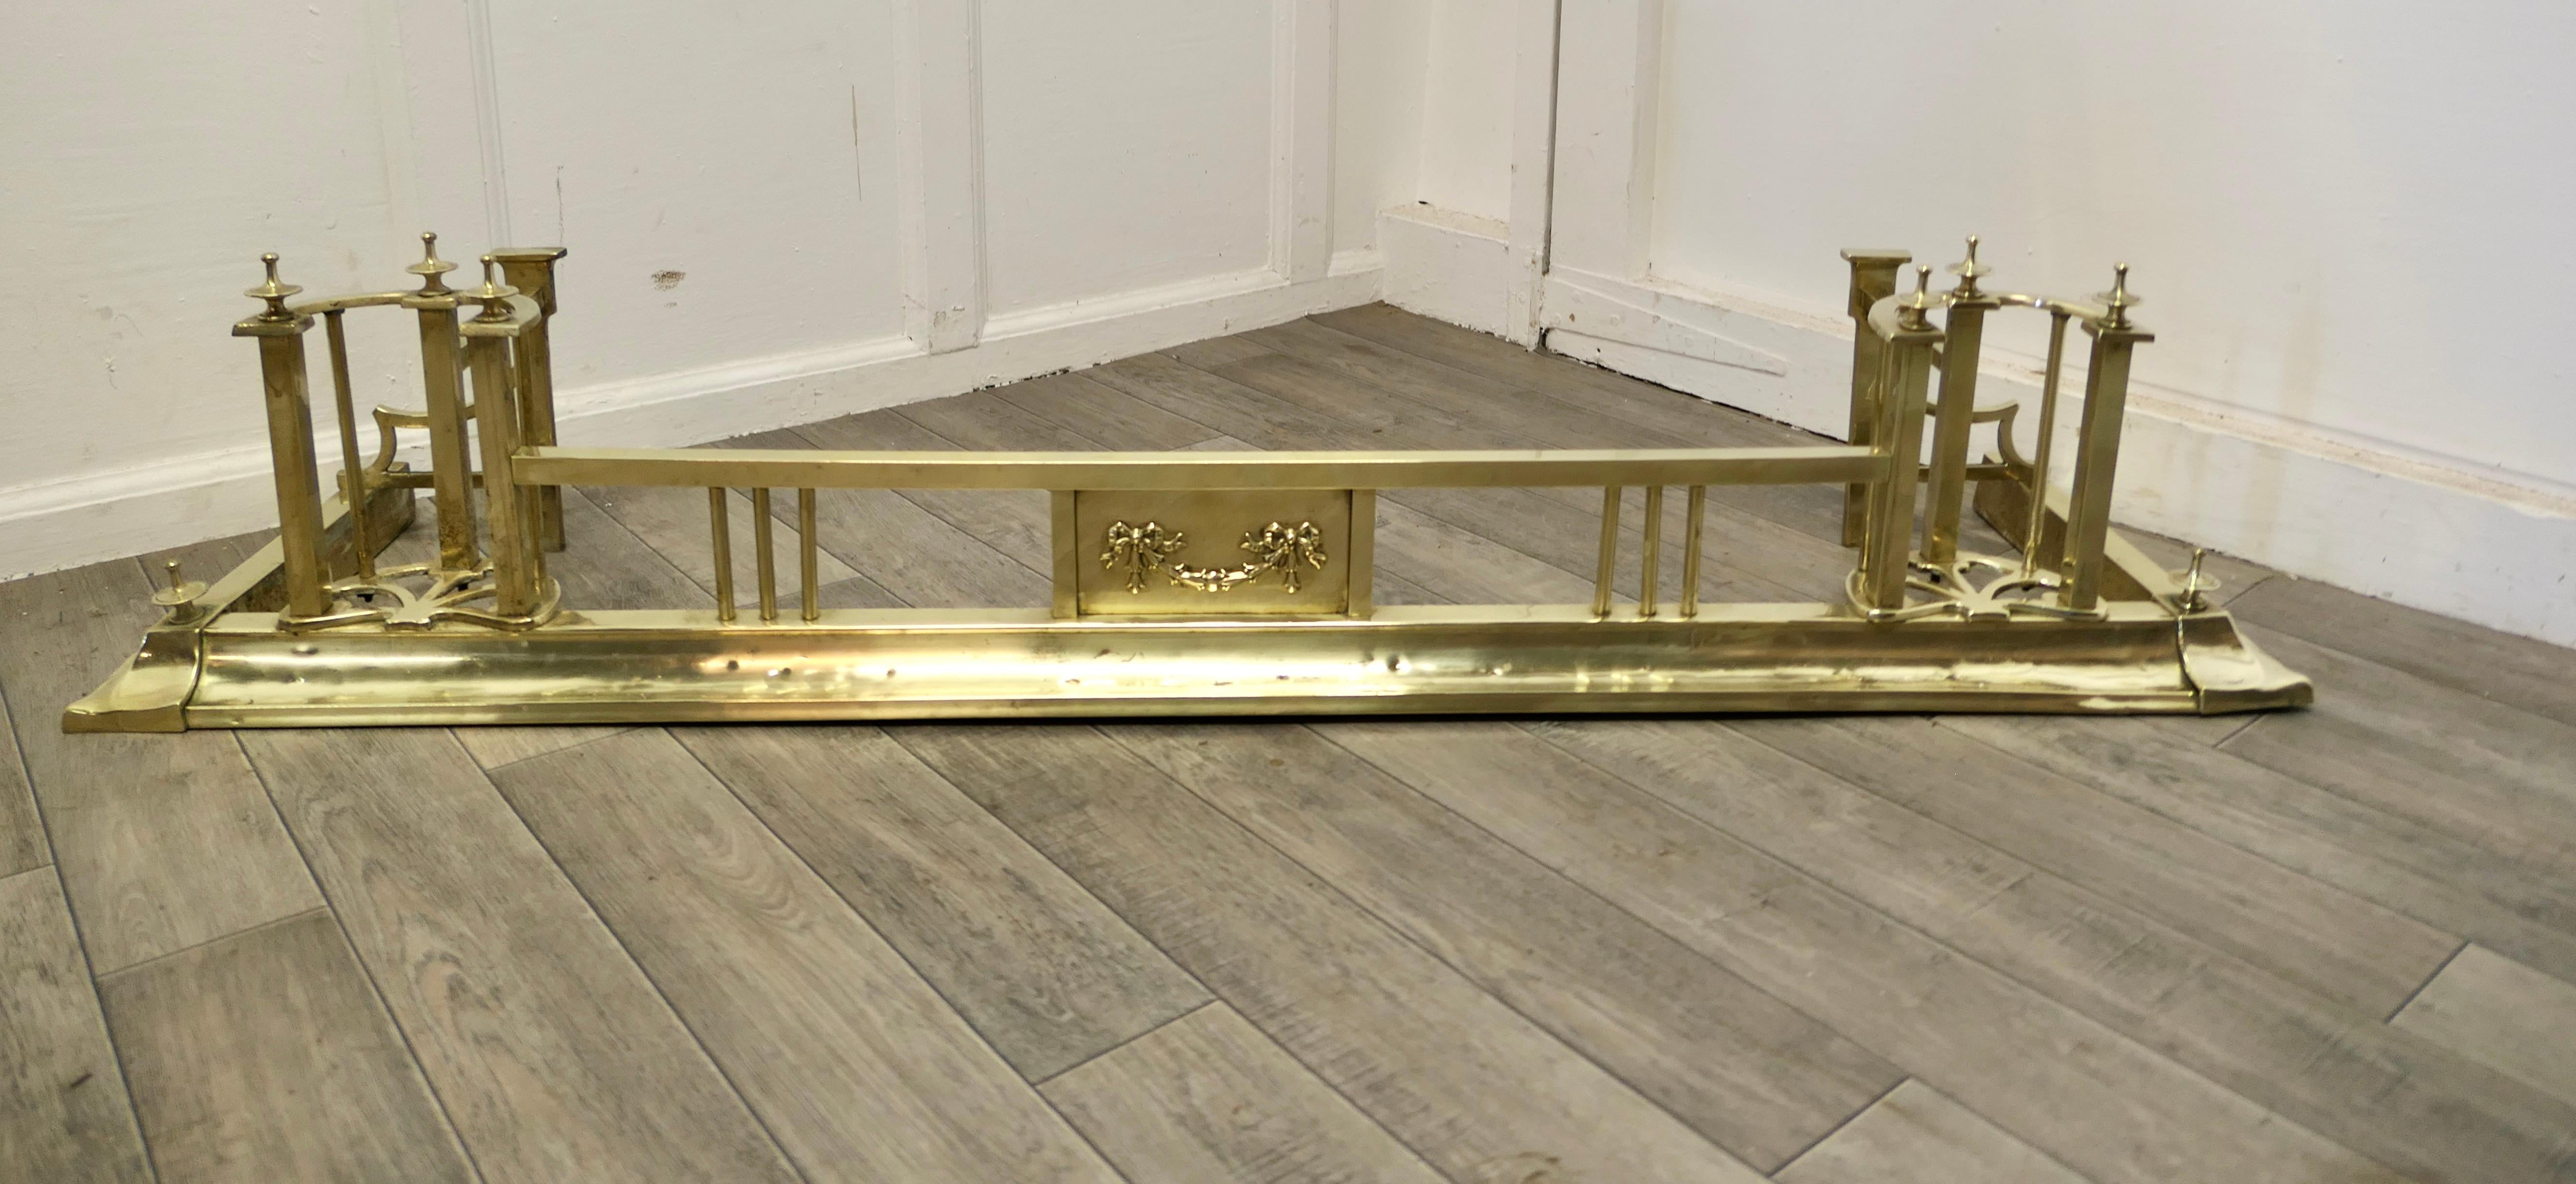 An Art Nouveau Victorian brass fender 

This is a very attractive Brass Fender it has a small rail to the front in the Art Nouveau style with larger decoration at the sides
The Fender is in good Condition it is 11” high, 53” long and 14”